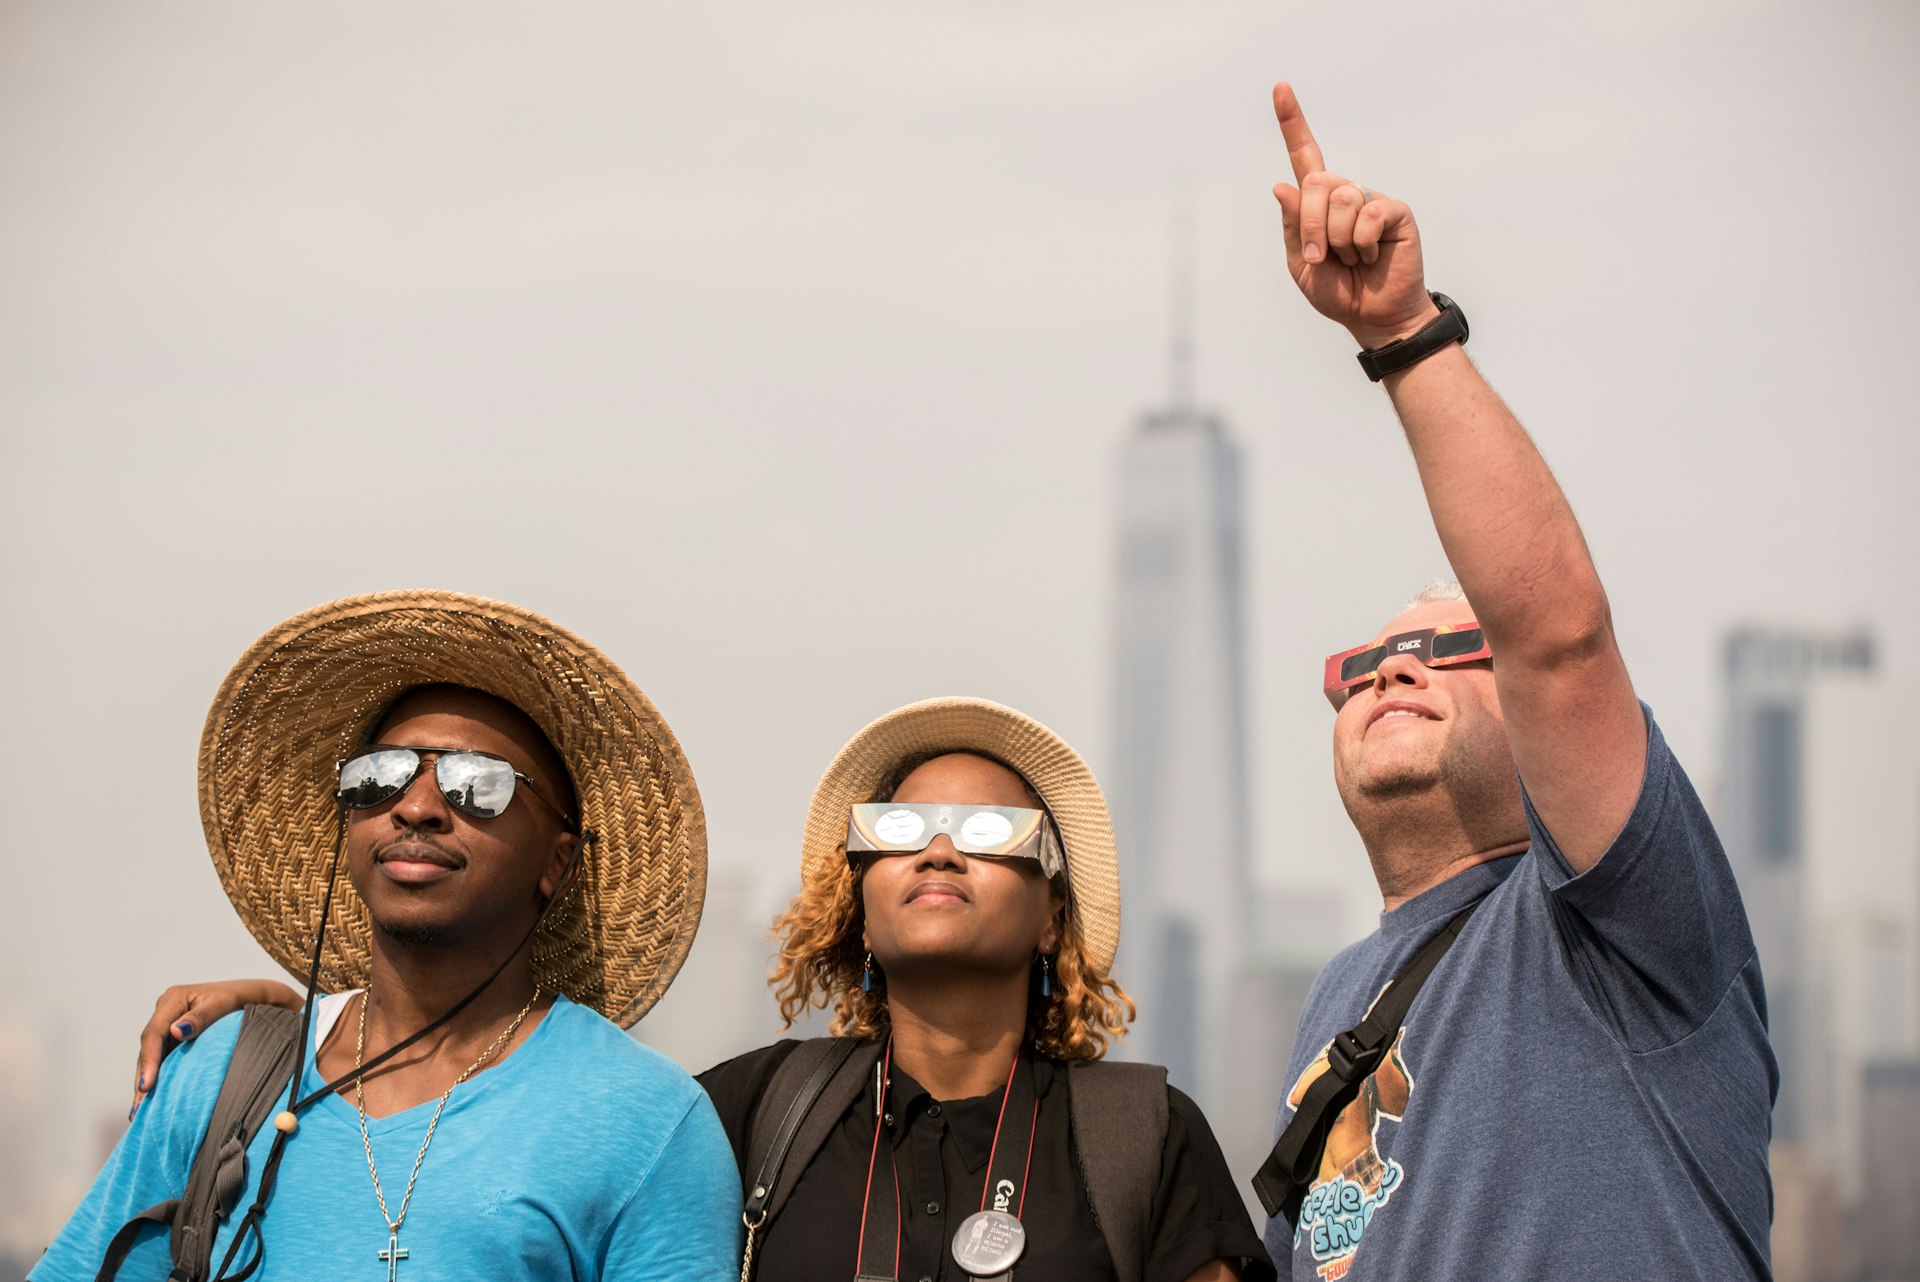 People watch the solar eclipse at Liberty Island on August 21, 2017 in New York City, USA